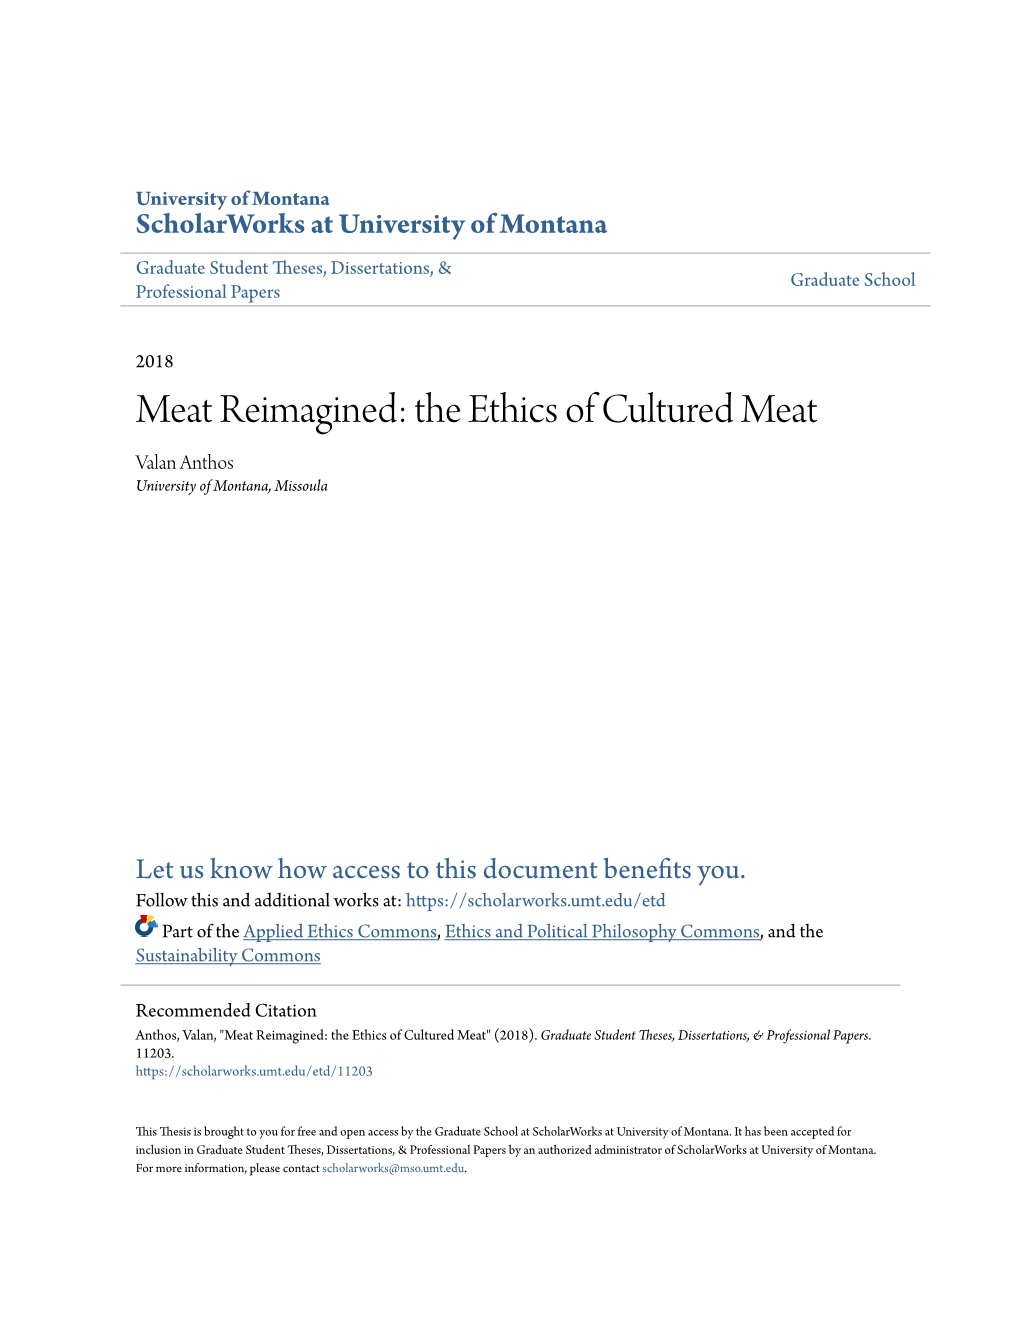 The Ethics of Cultured Meat Valan Anthos University of Montana, Missoula